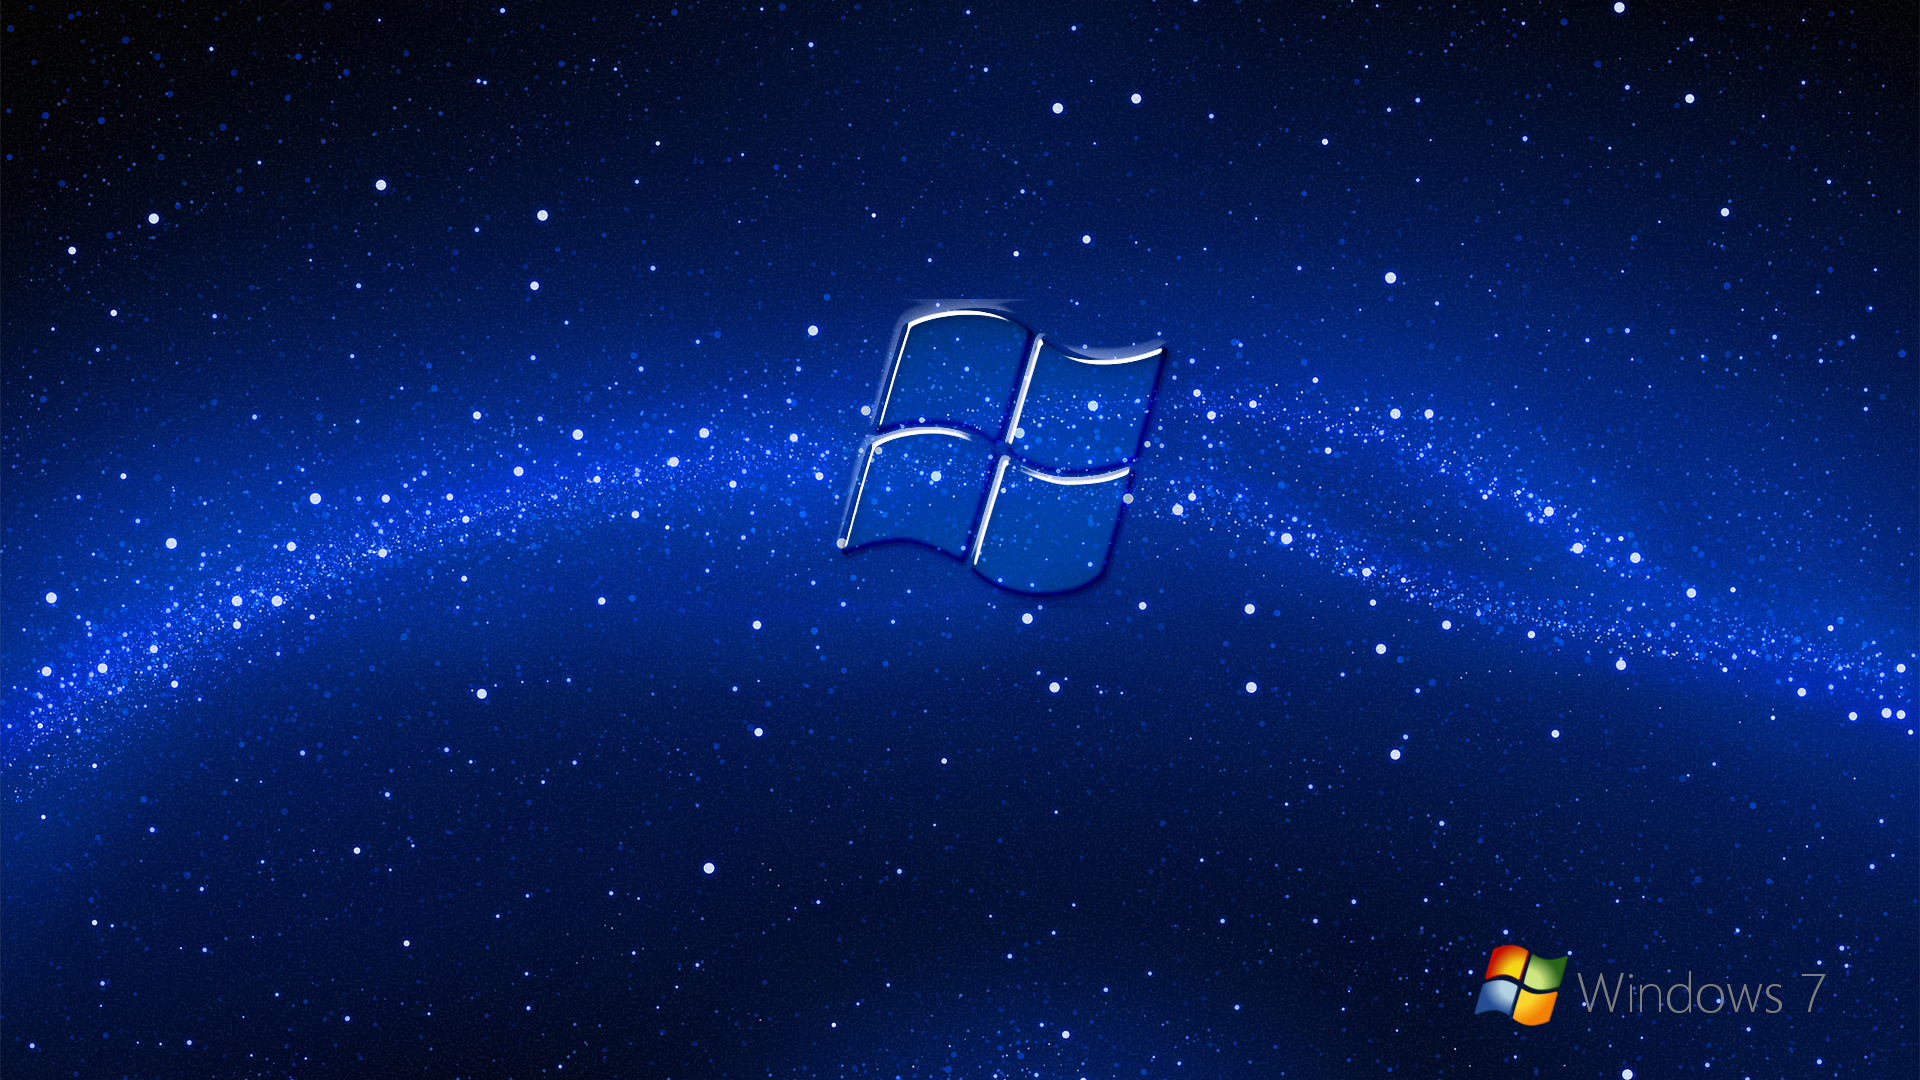 Glowing Windows 7 logo Wallpaper | Wide Wallpaper Collections